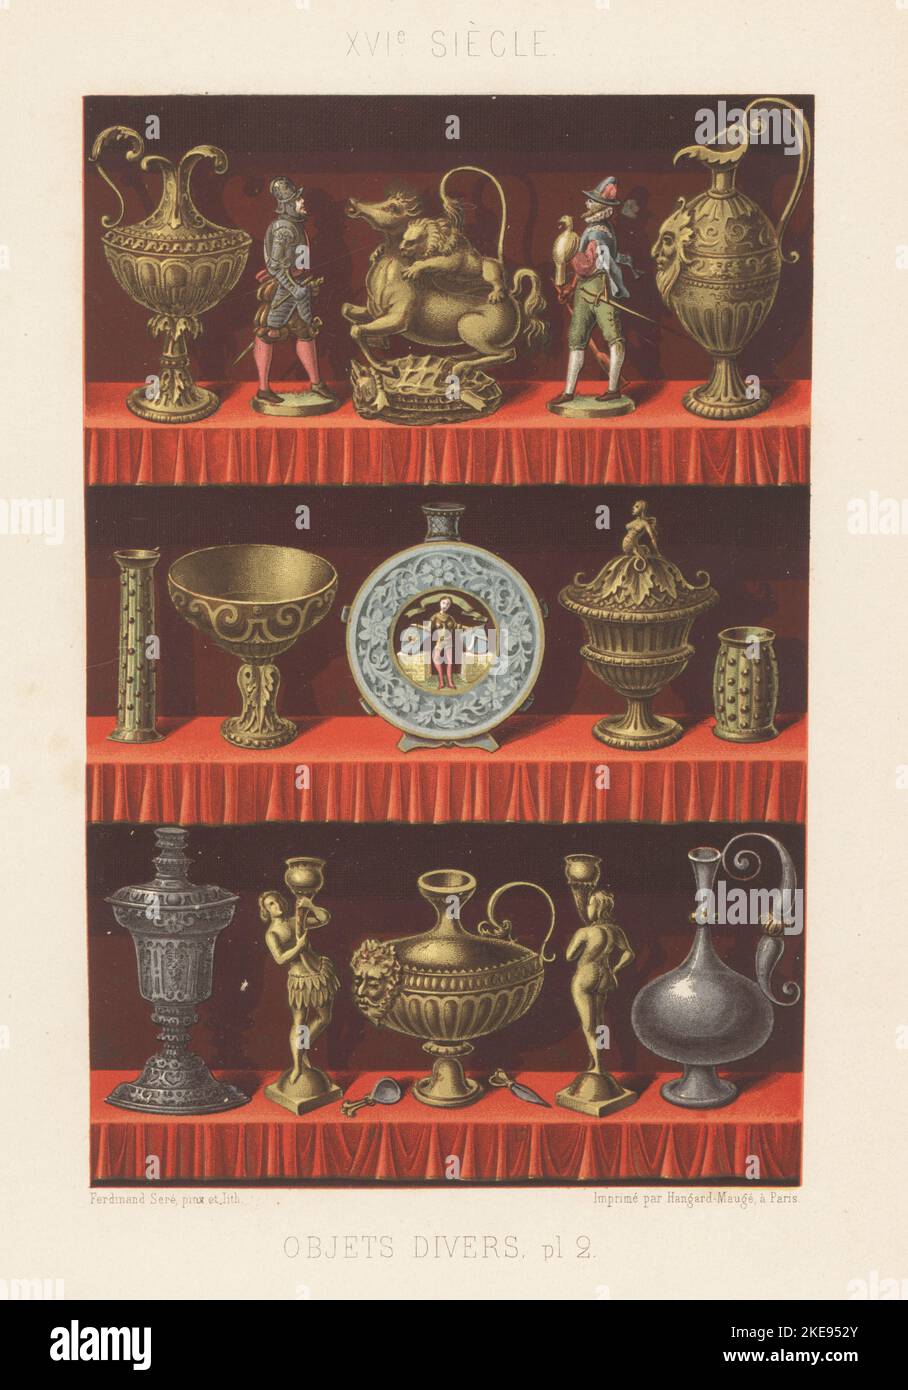 Renaissance vases, jugs, statuettes, figurines, plates, etc., used to decorate royal houses, 16th century. Chromolithograph by Ferdinand Sere from Charles Louandre’s Les Arts Somptuaires, The Sumptuary Arts, Hangard-Mauge, Paris, 1858. Stock Photo